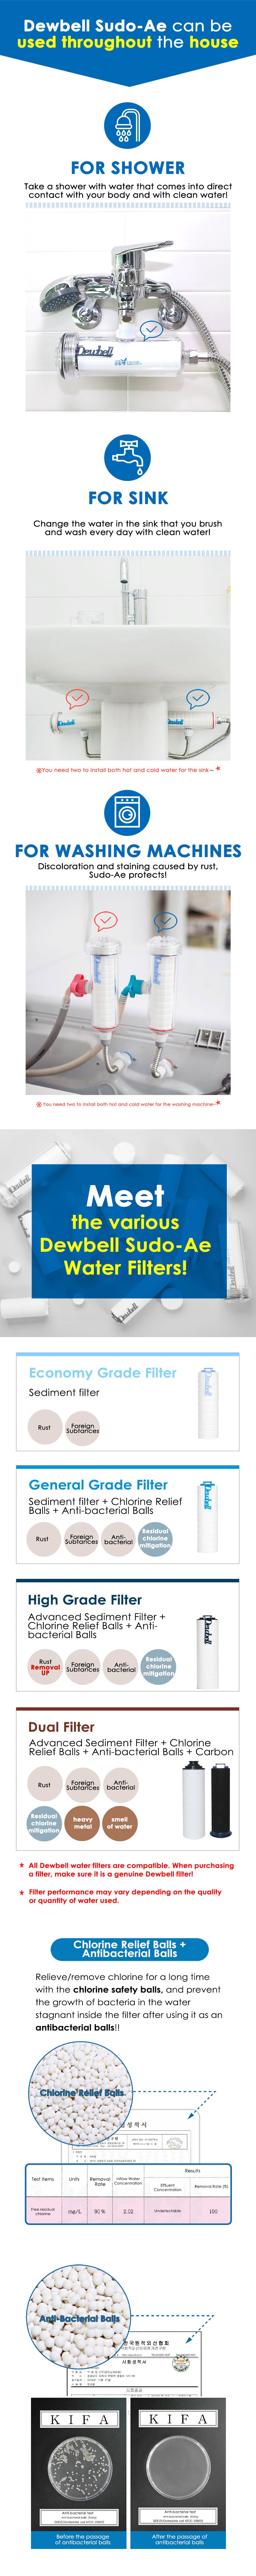 [Dewbell] F15 Water Refill Filter / SUDO-AE LINE UP / Product from Korea